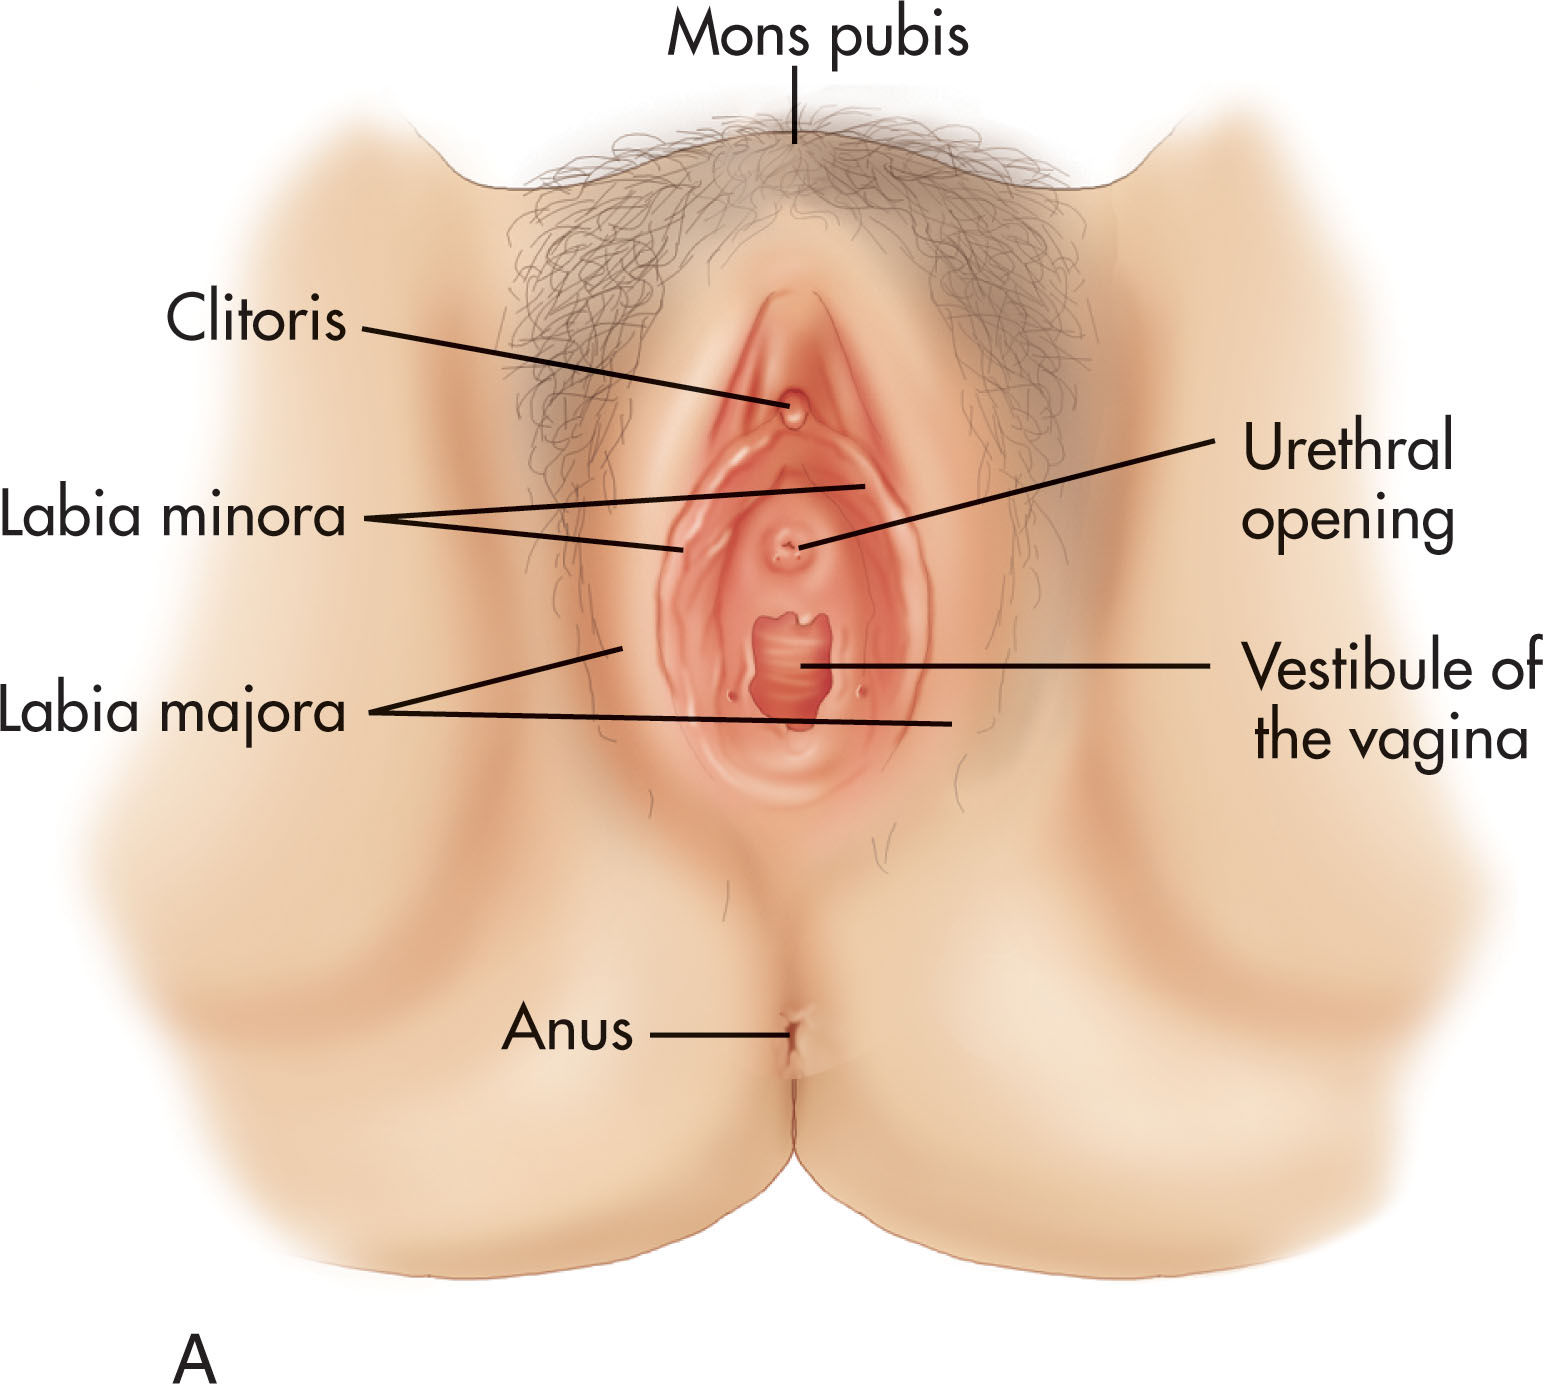 Fig. 41.2, (A) The external genitalia in the female, also known as the vulva or the pudendum , consist of the mons pubis, labia majora, labia minora, clitoris, urethral opening, and vestibule of the vagina. (B) Anatomically, the pelvis is divided into two continuous compartments (true and false pelvis) by an oblique plane that passes through the pelvic brim. (C) This plane of division passes from the superior border of the sacrum to the superior margin of the pubic symphysis and corresponds to the iliopectineal line.